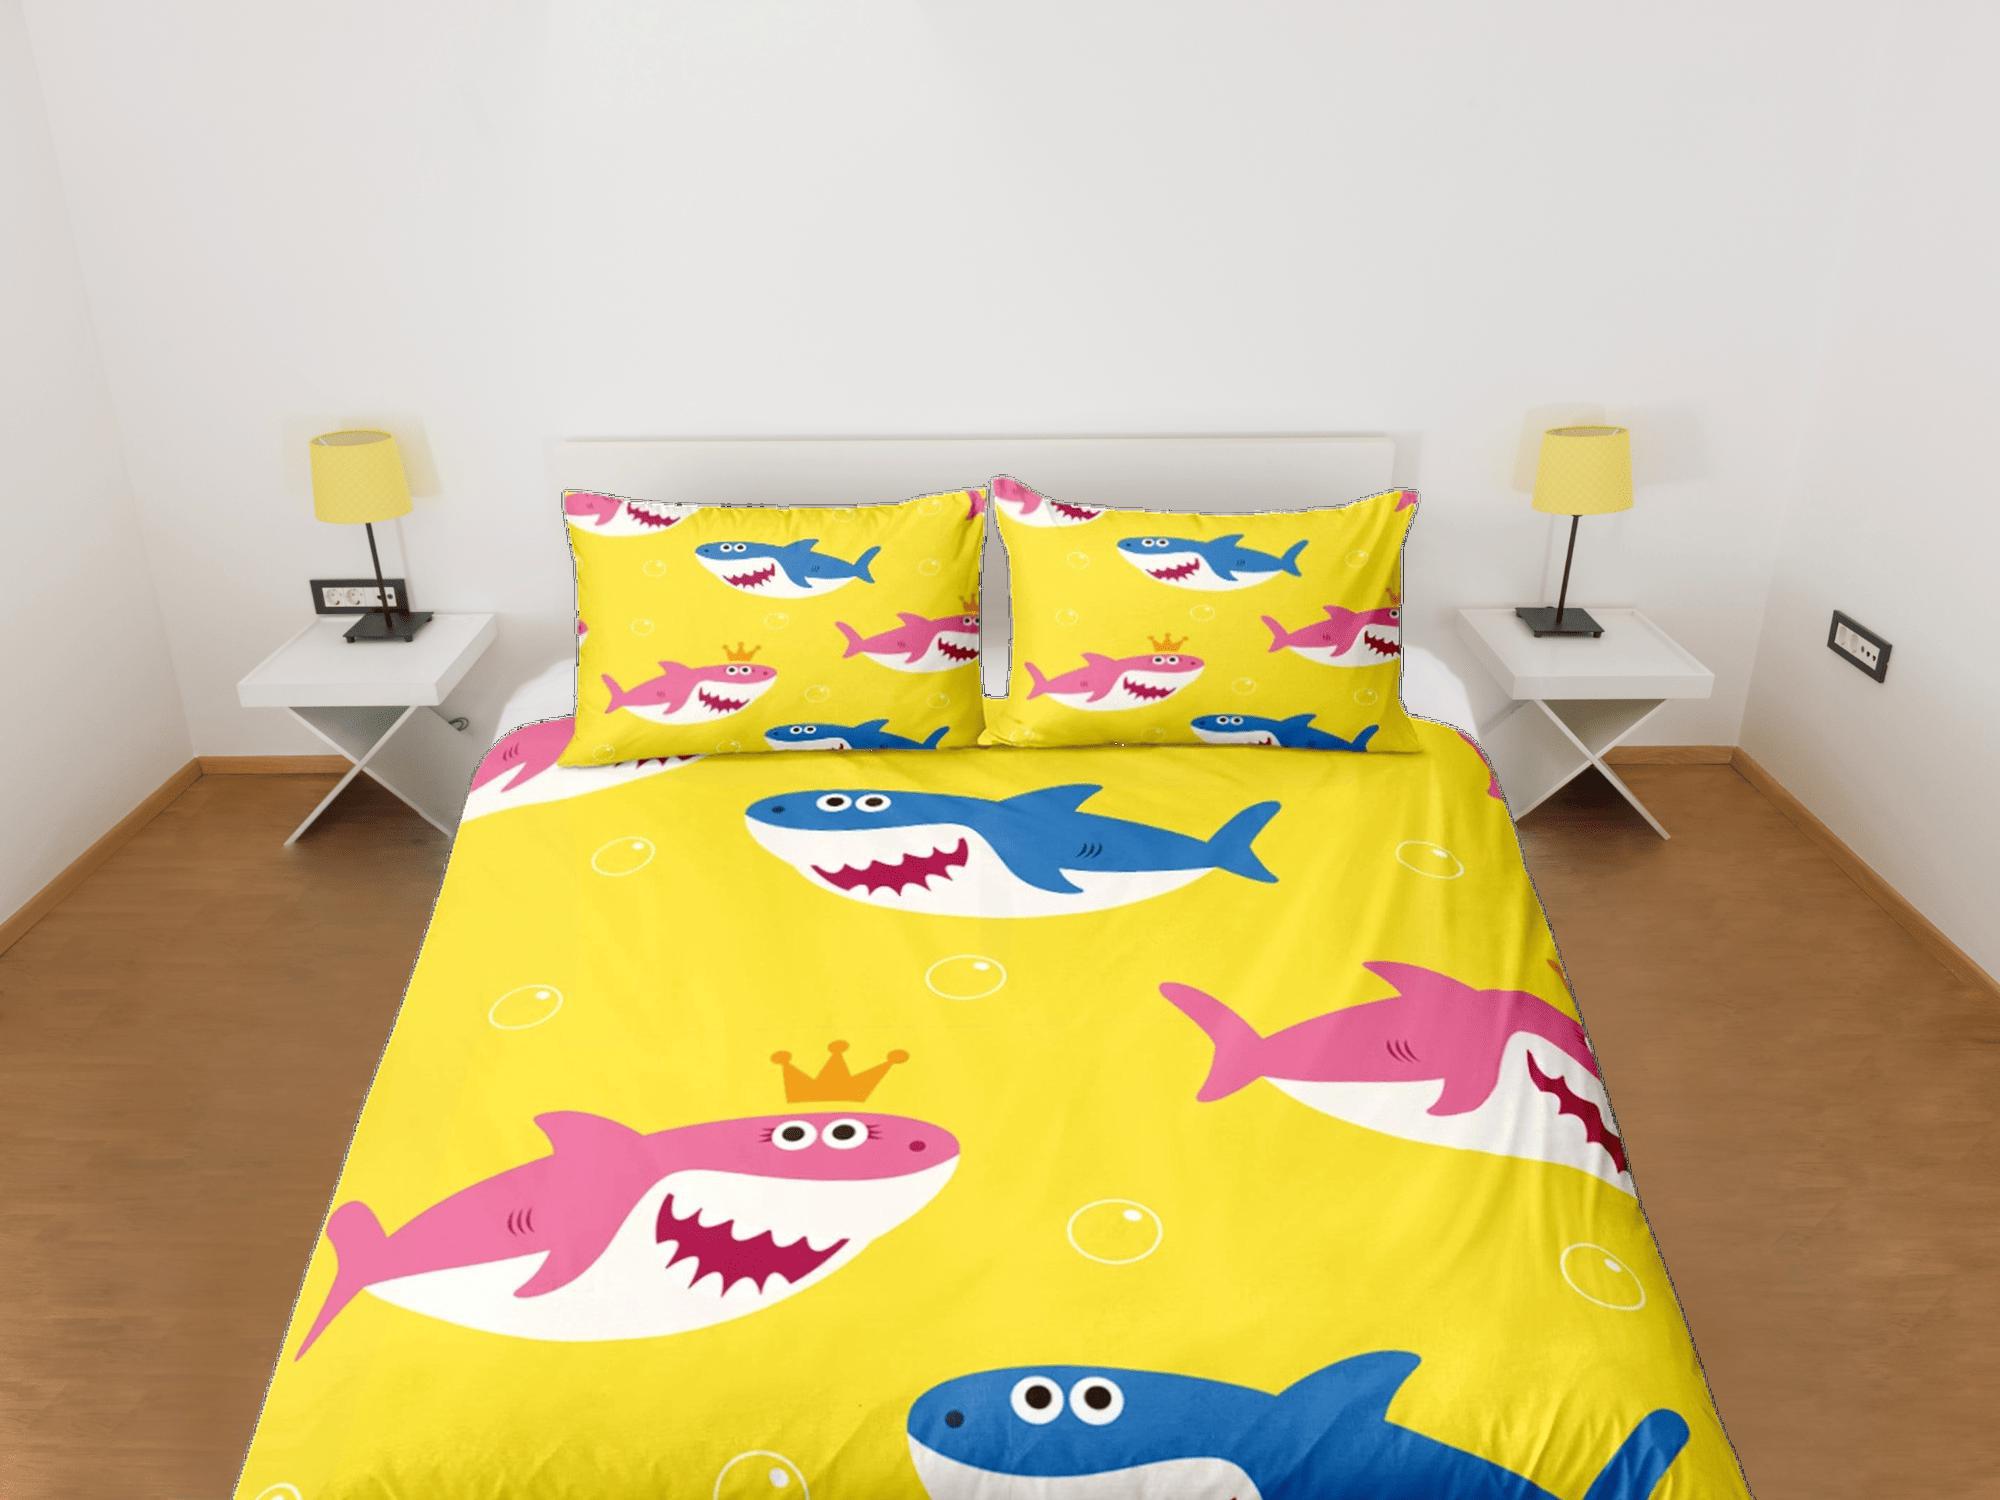 daintyduvet Happy Sharks Yellow Duvet Cover Set Colorful Bedspread, Kids Full Bedding Set with Pillowcase, Comforter Cover Twin